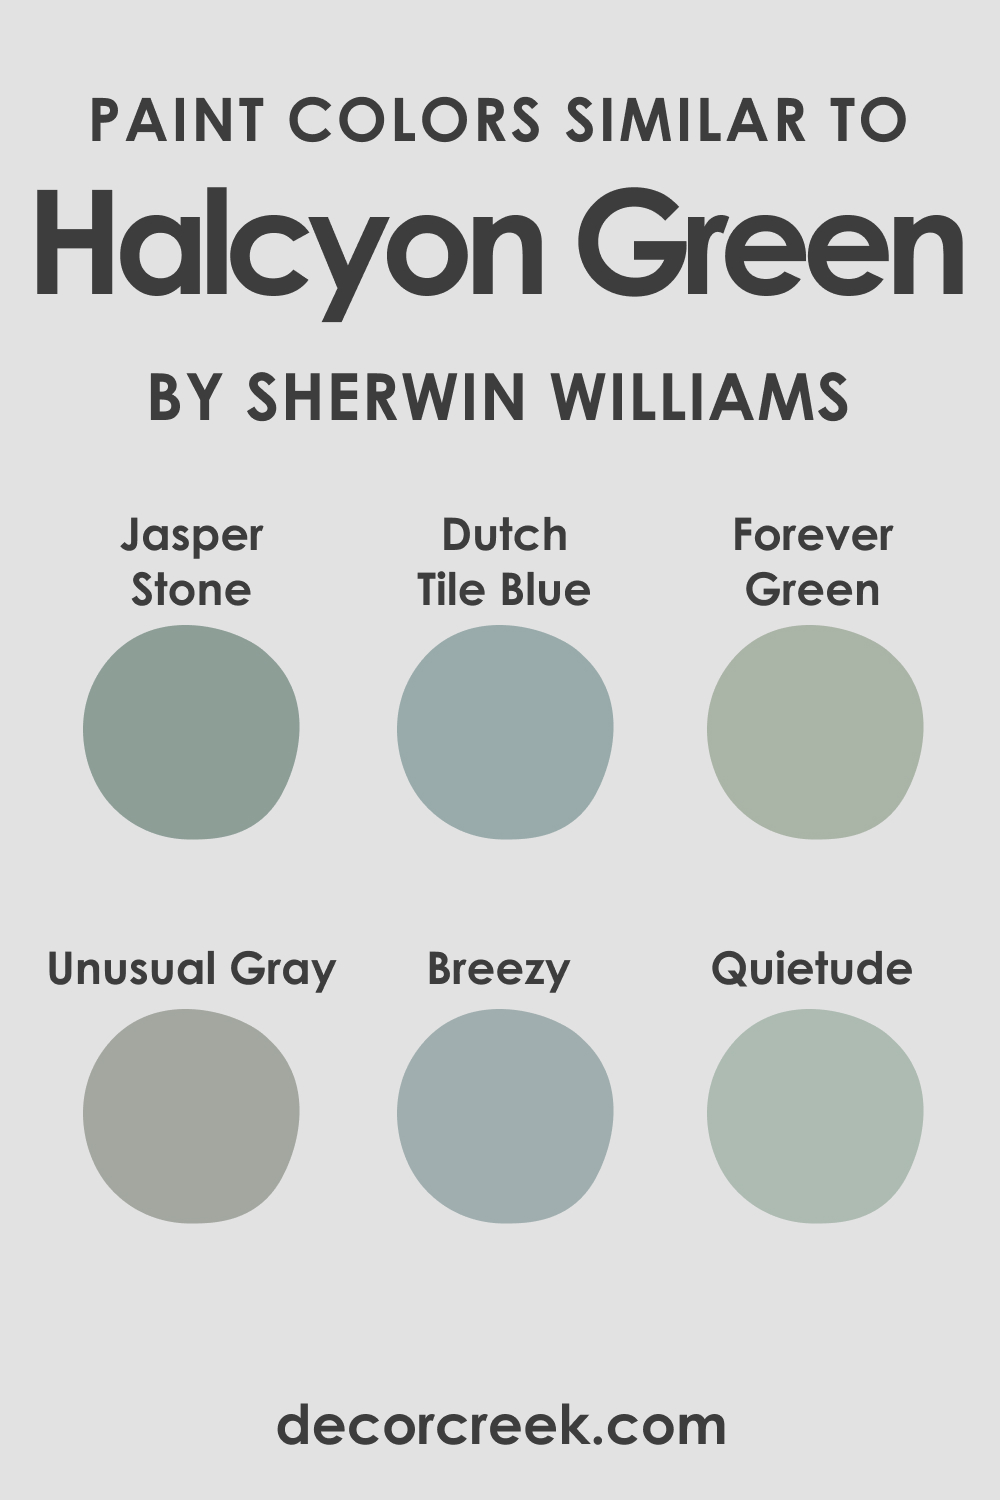 Paint Colors Similar to Halcyon Green